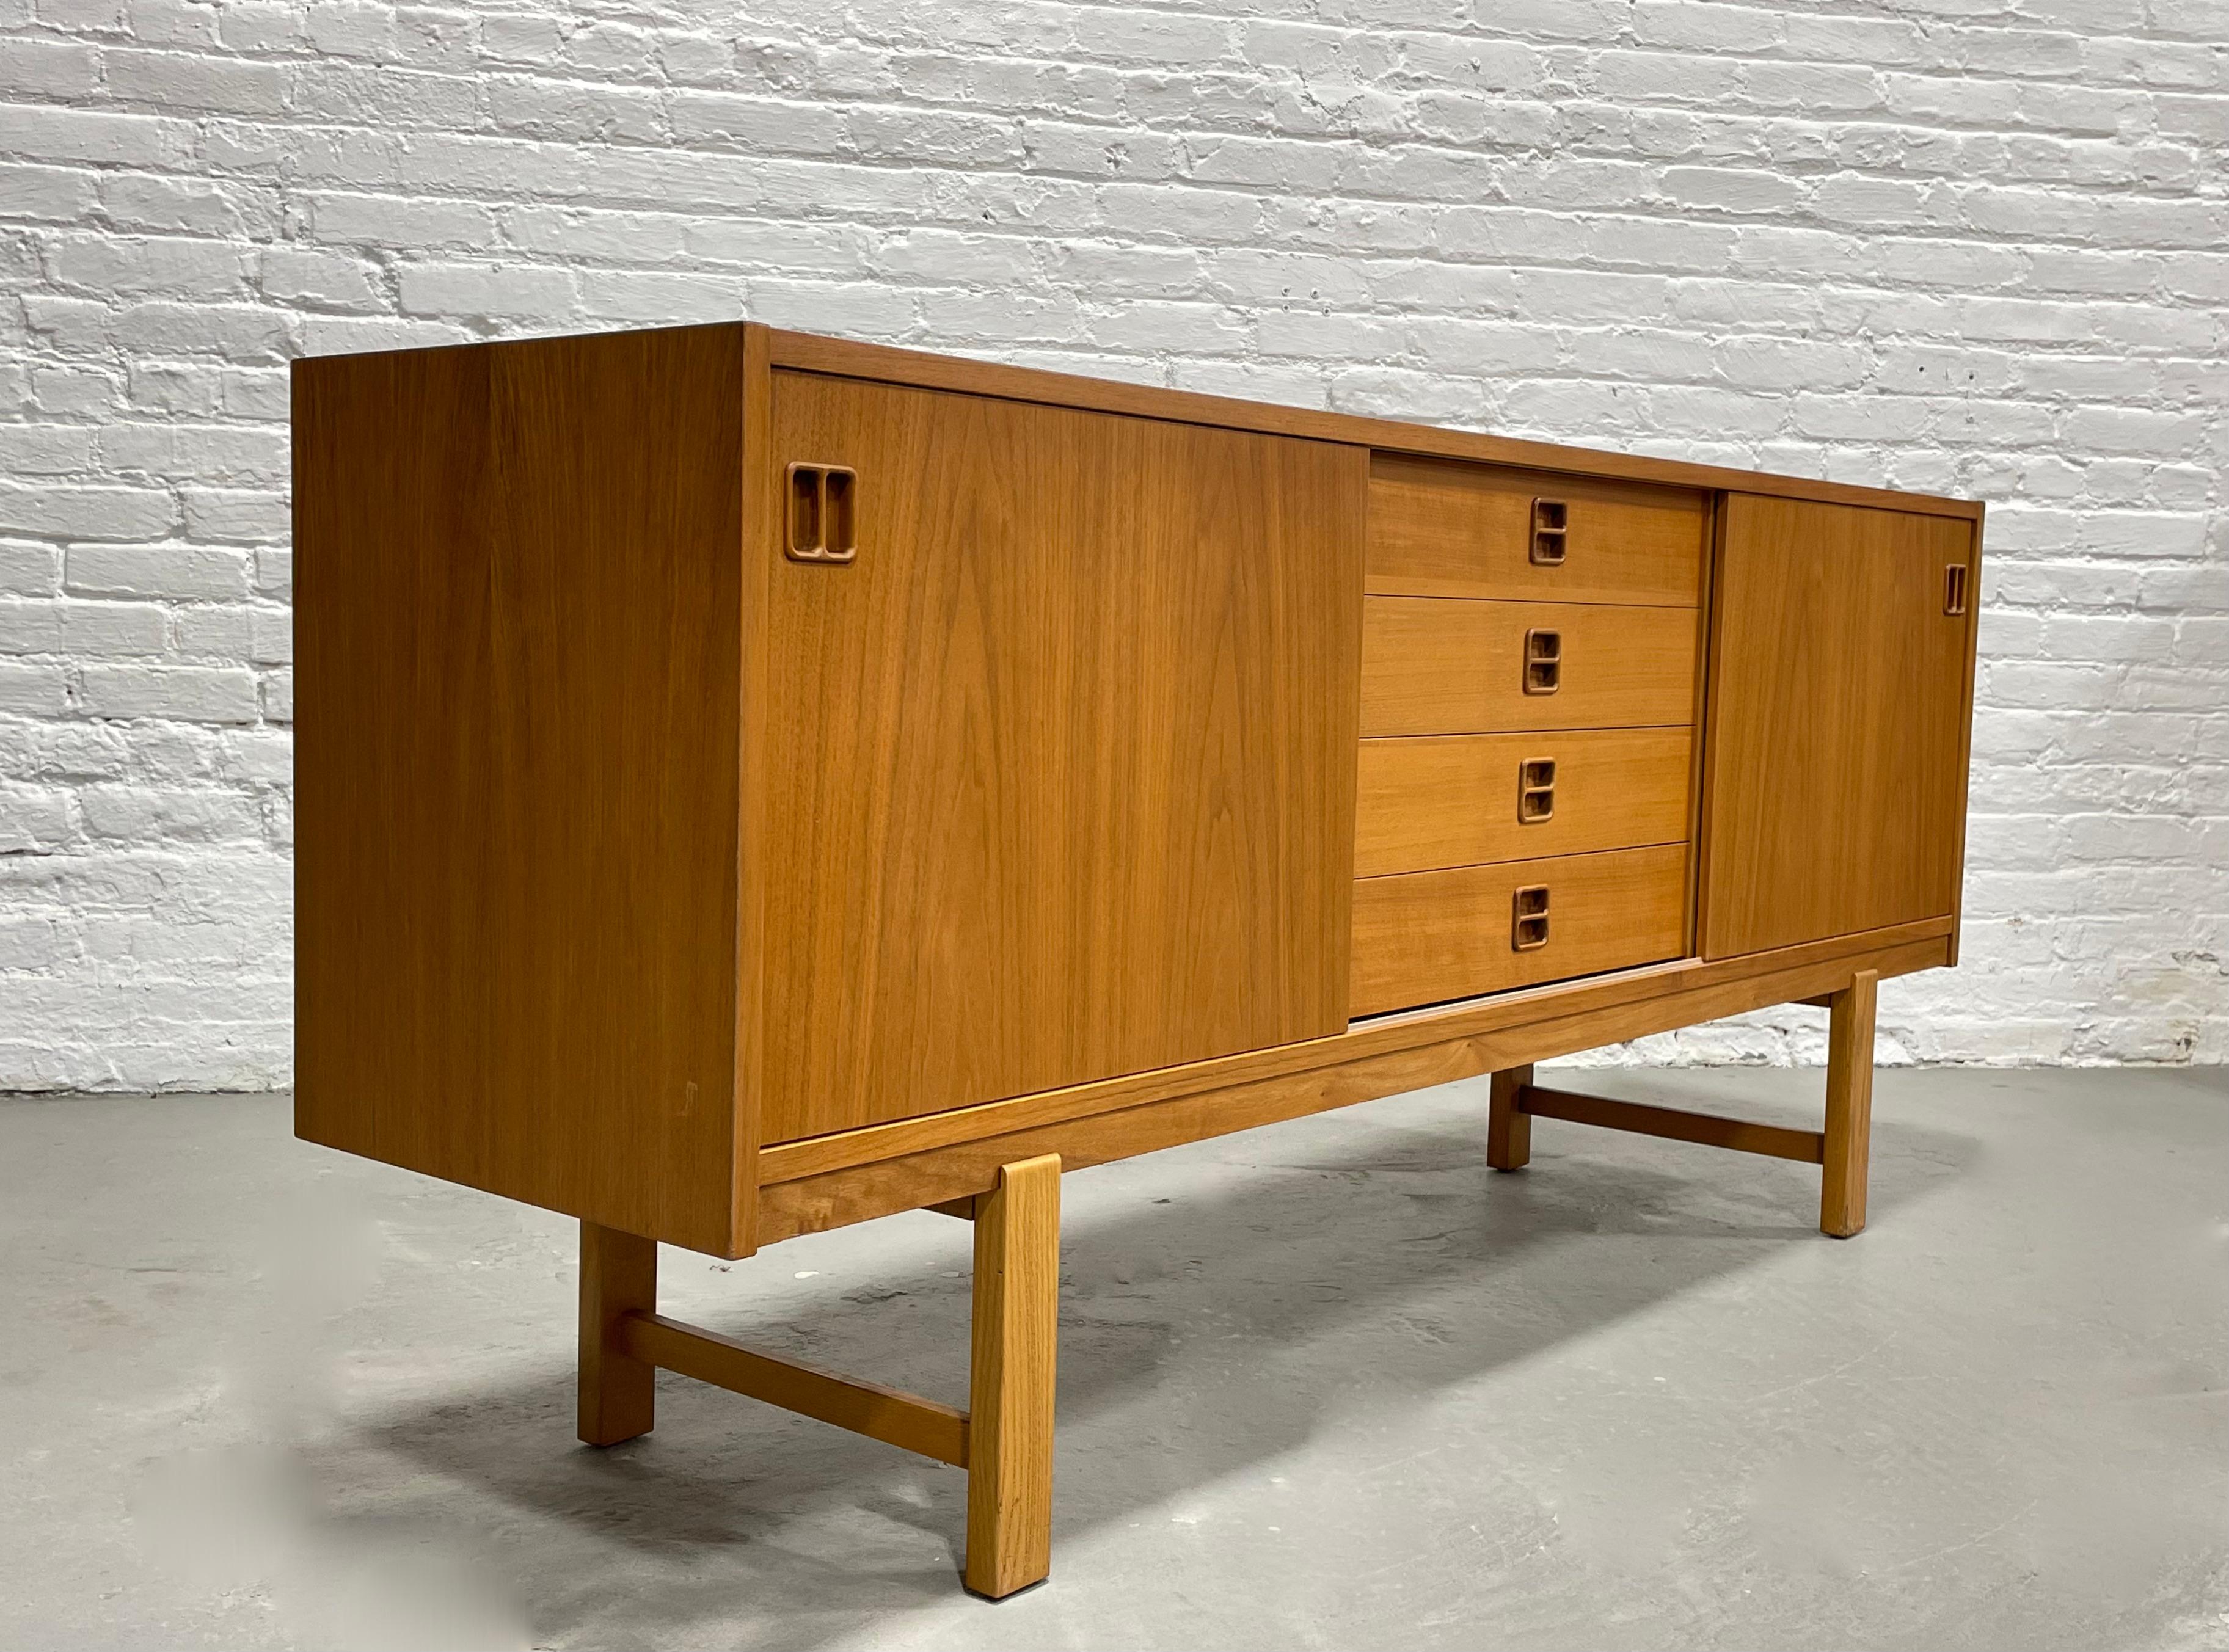 Mid-Century Modern Teak Danish sideboard, circa 1960s. Two sliding doors with a generous shelving area along each side and 4 dovetailed drawers along the center with unique hand-pulls. The top drawer features a green felt lined silverware drawer.